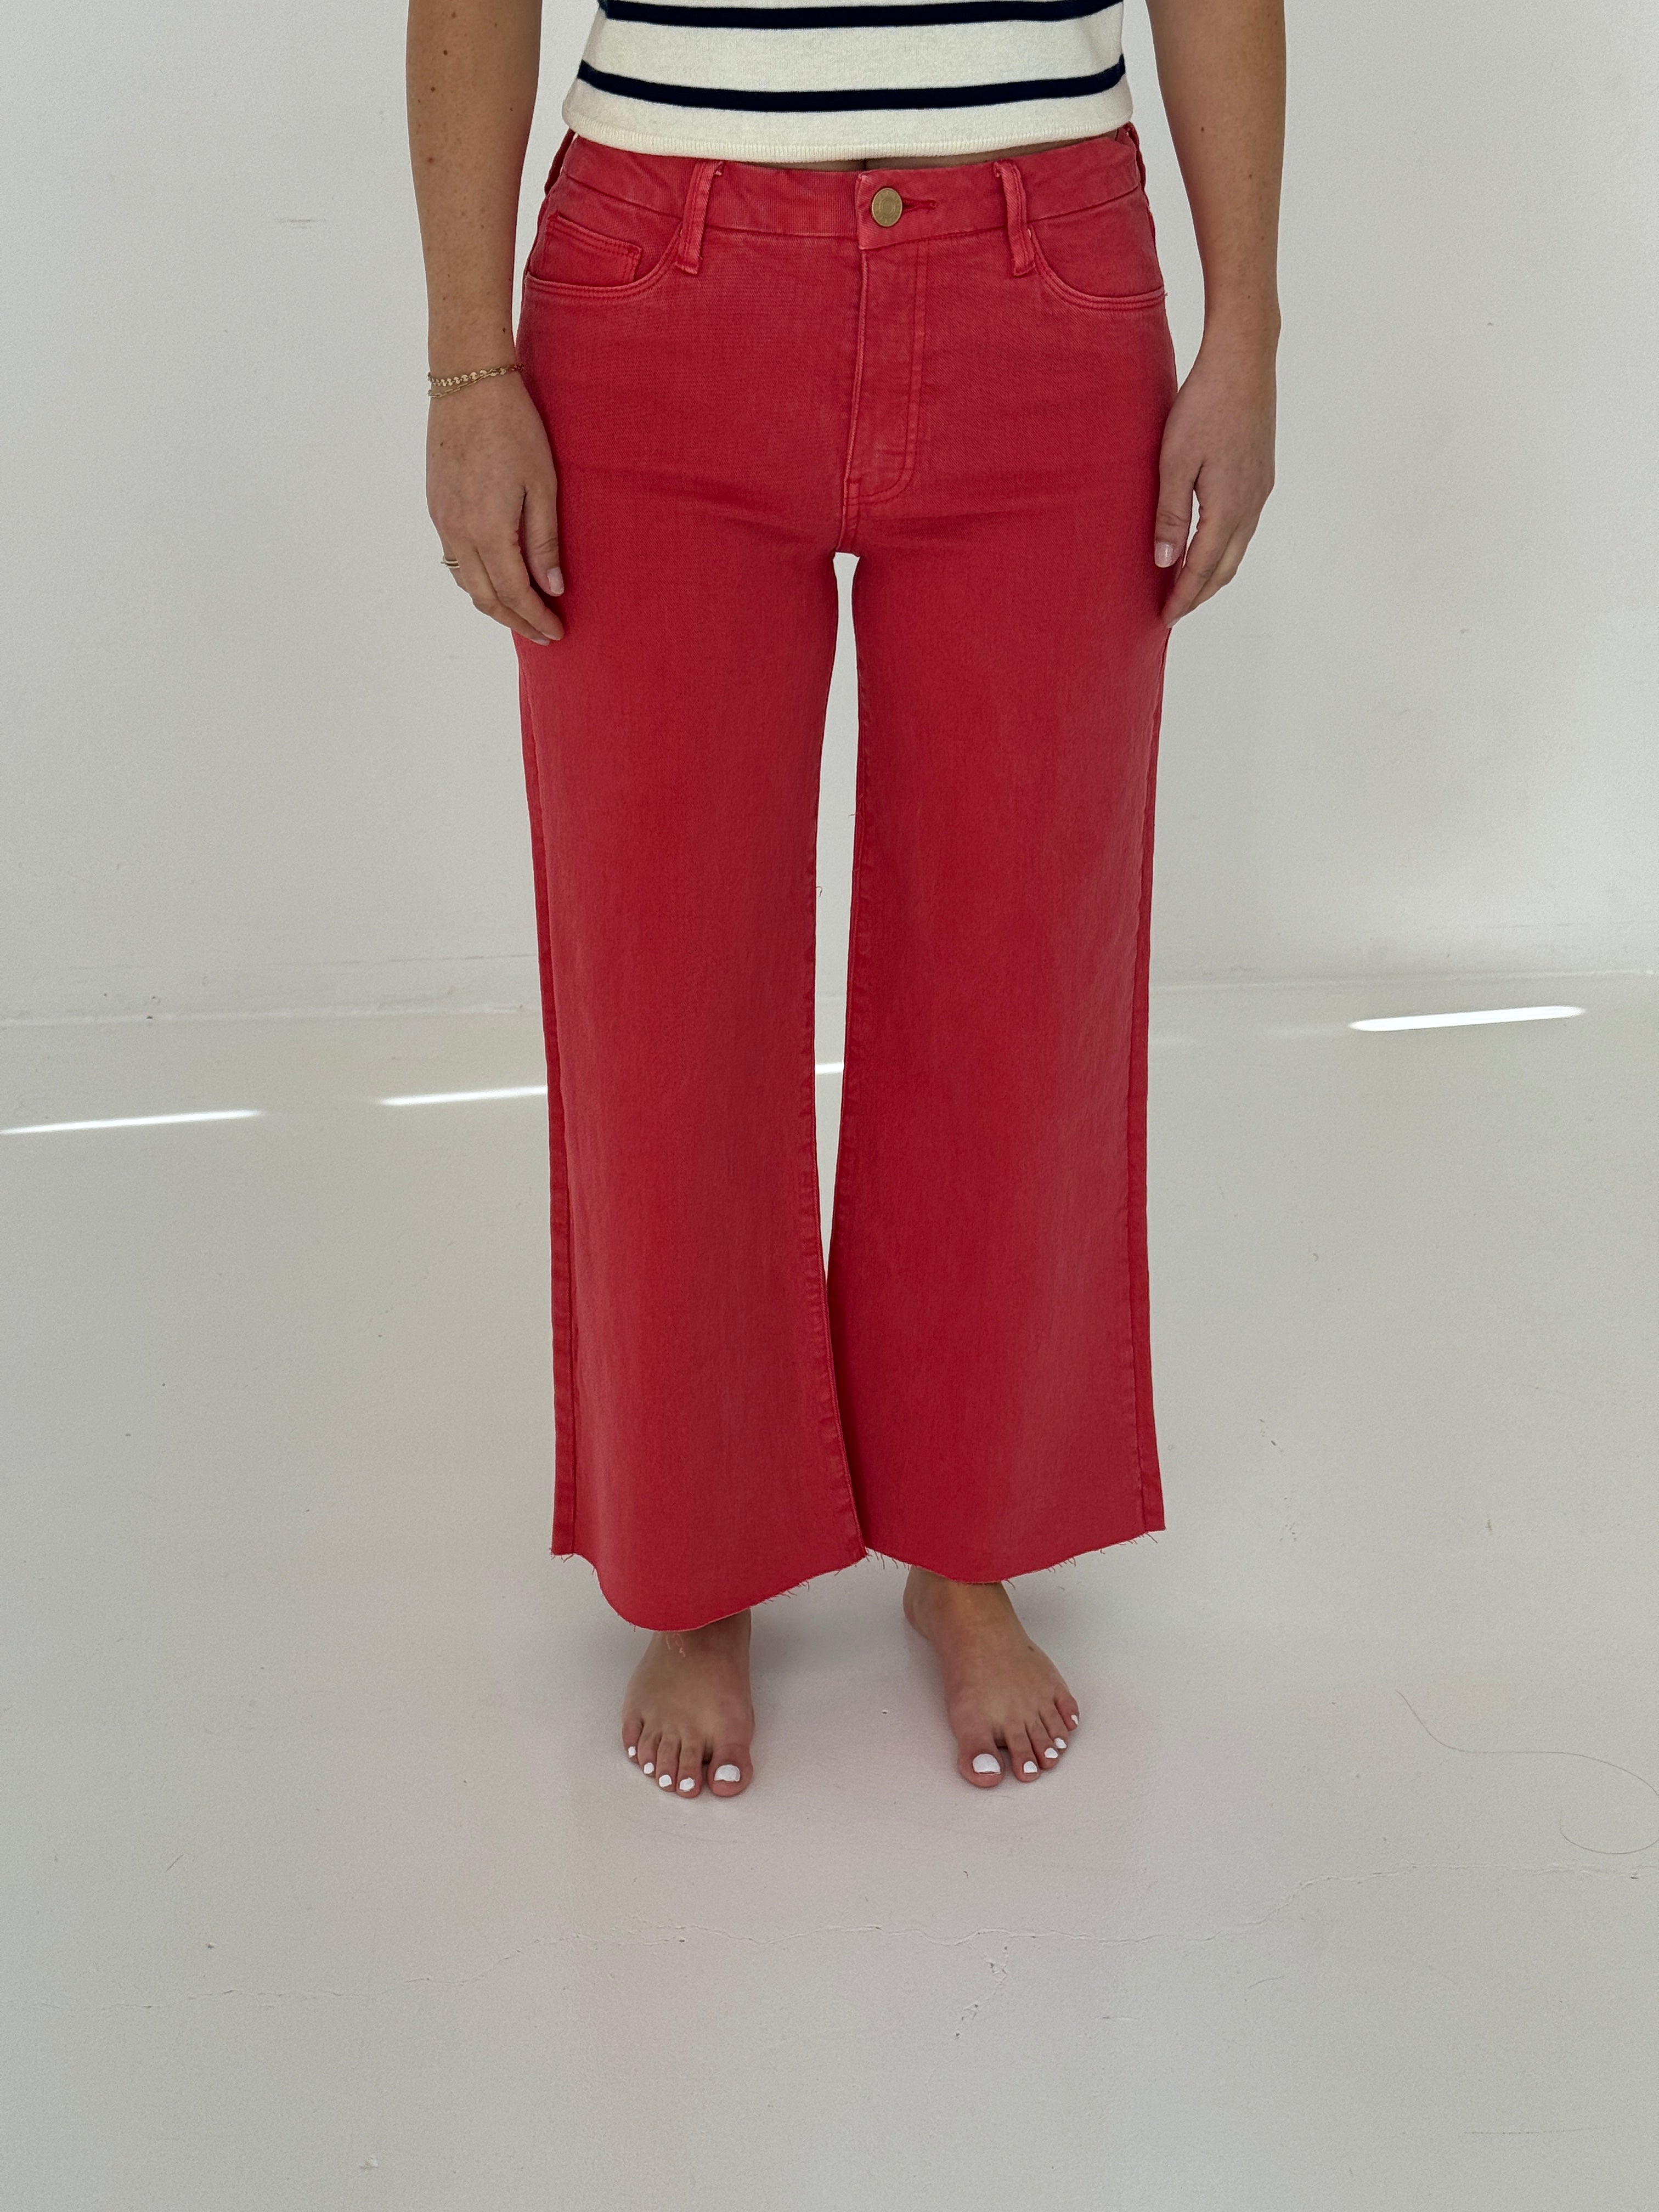 Kut Meg High Rise Fab Ab Jeans in Strawberry-220 Pants-Little Bird Boutique